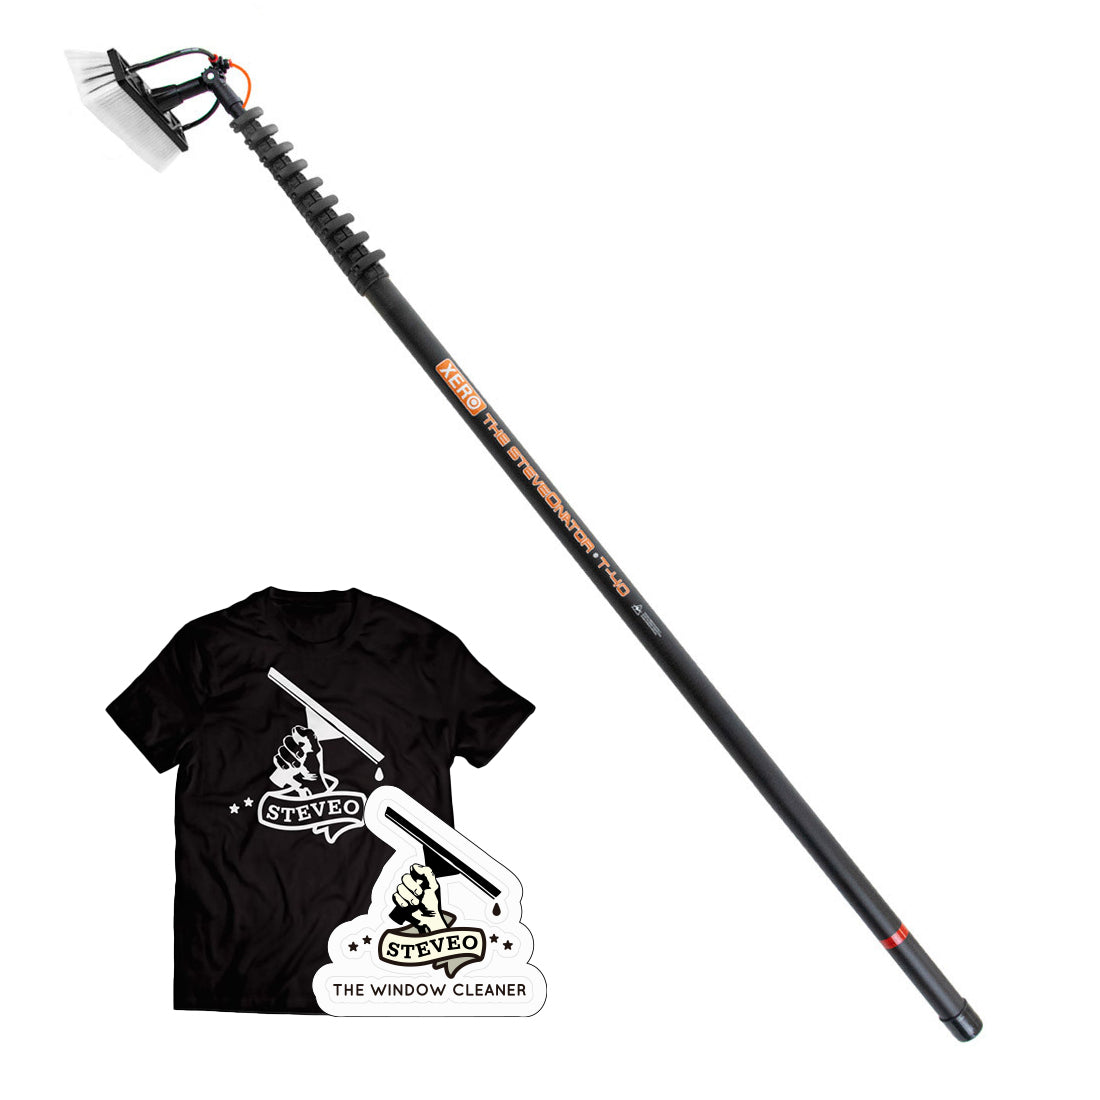 XERO SteveOnator Pole 40ft Tilted Left Side View With Steveo Shirt and Sticker Front View